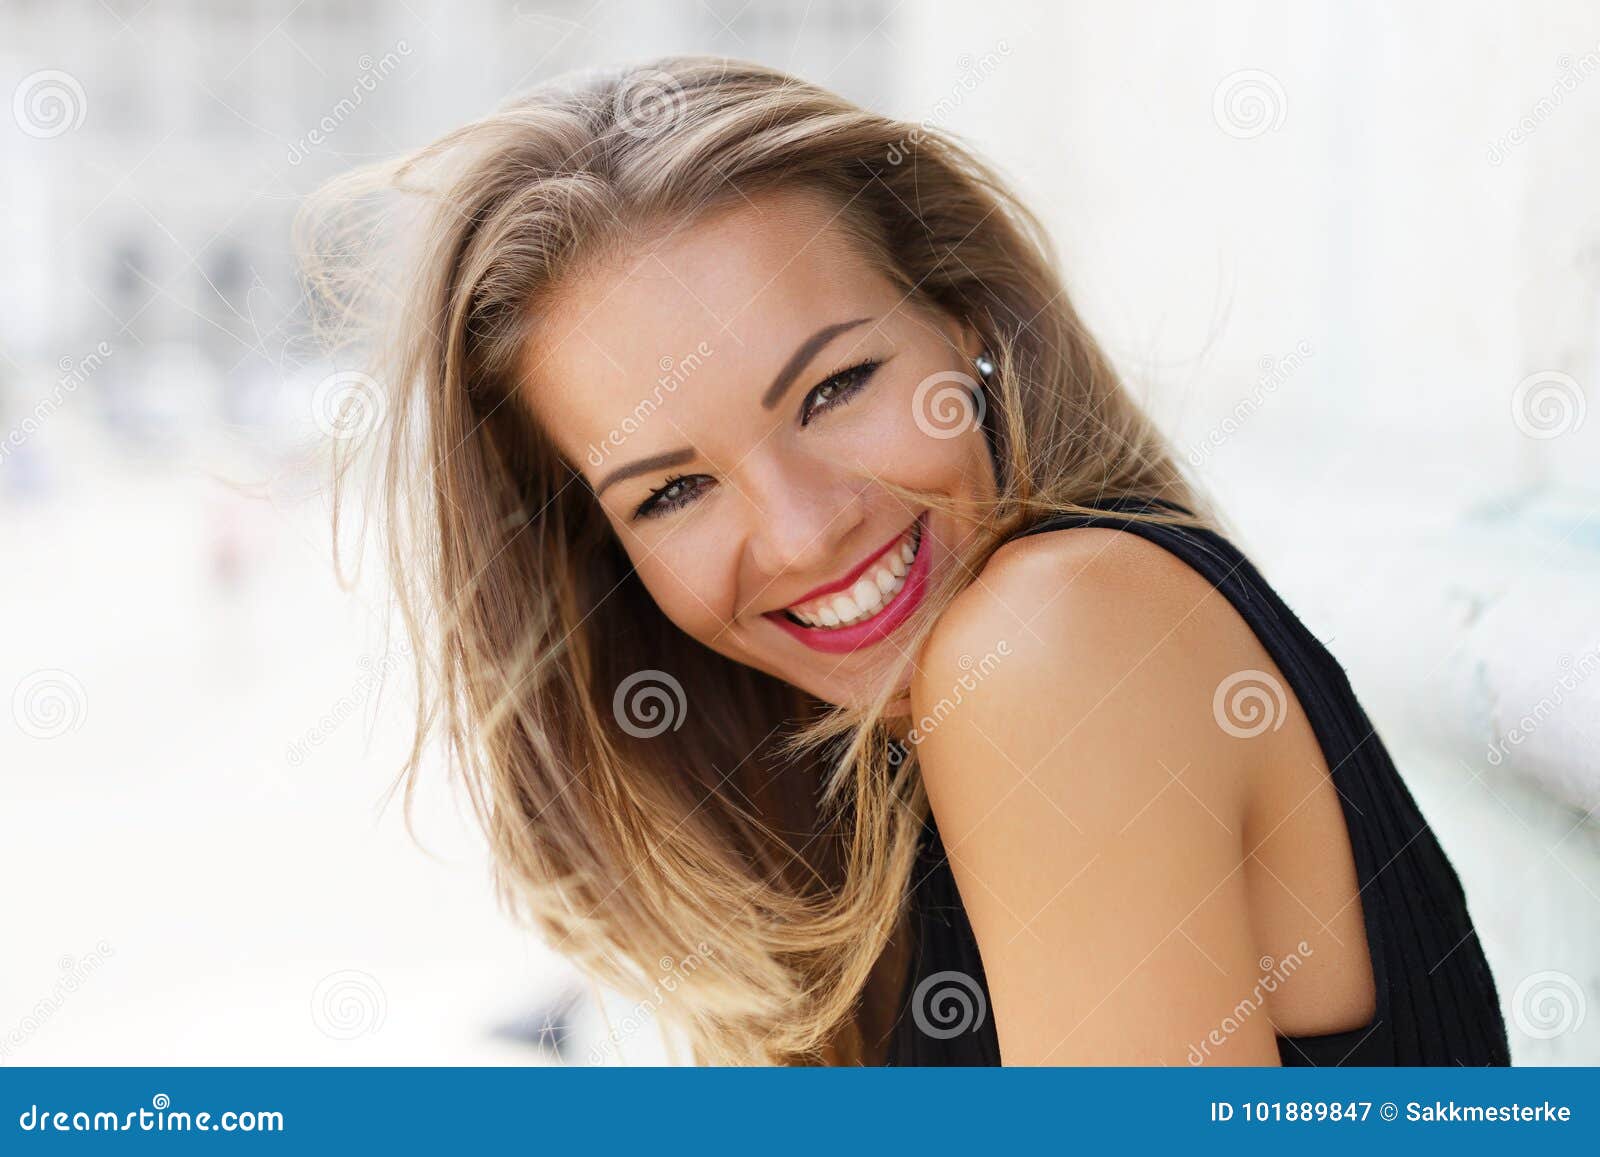 happy young carefree woman smiling outdoor portrait